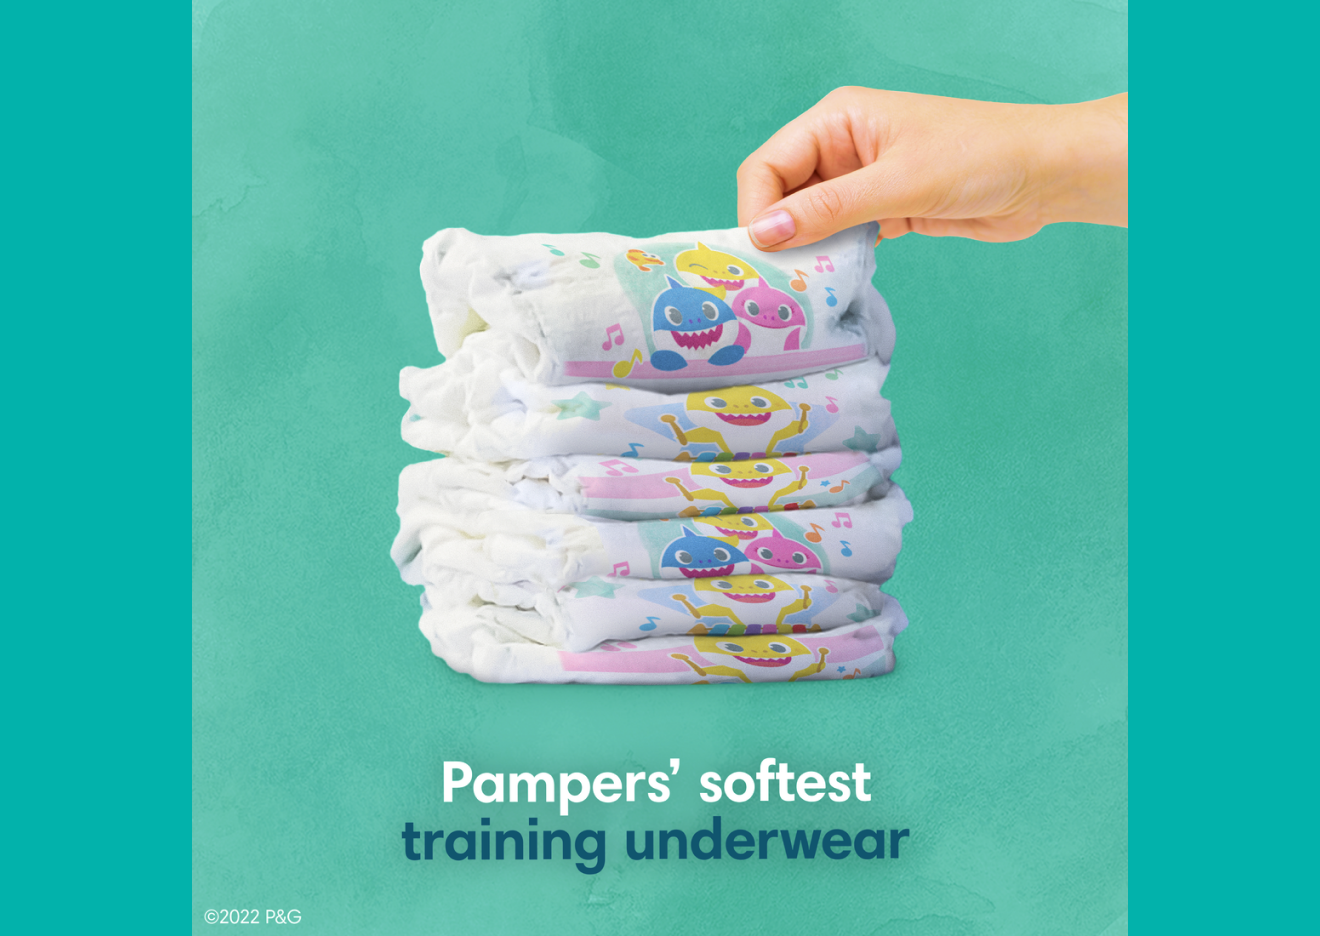 Diapers - Shop for Diapers, Wipes & Training Pants Products Online